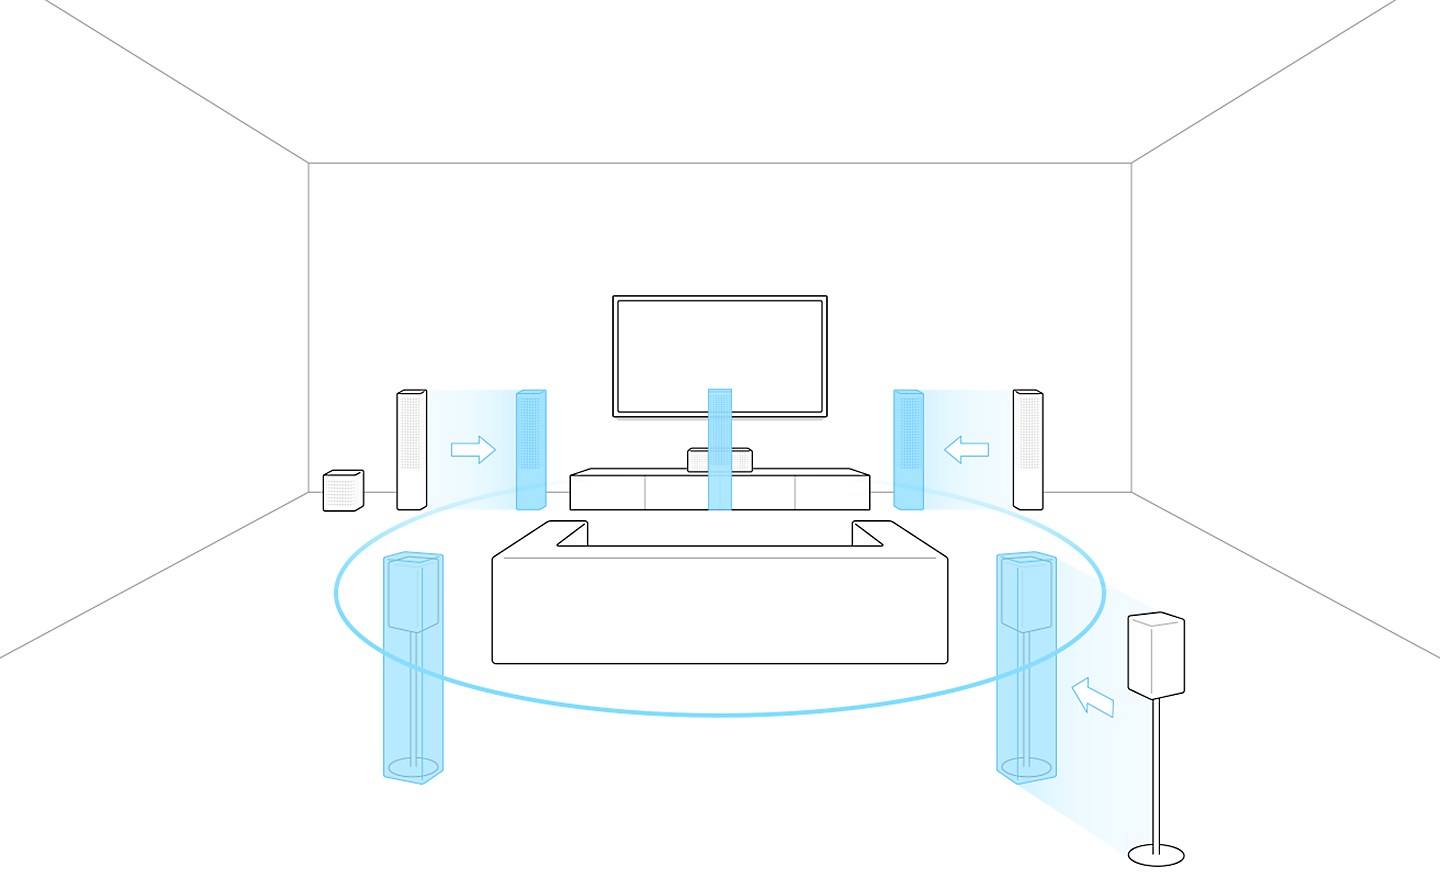 Outline image of a TV with sofa and speakers. Blue versions of the speakers in different positions indicate movement